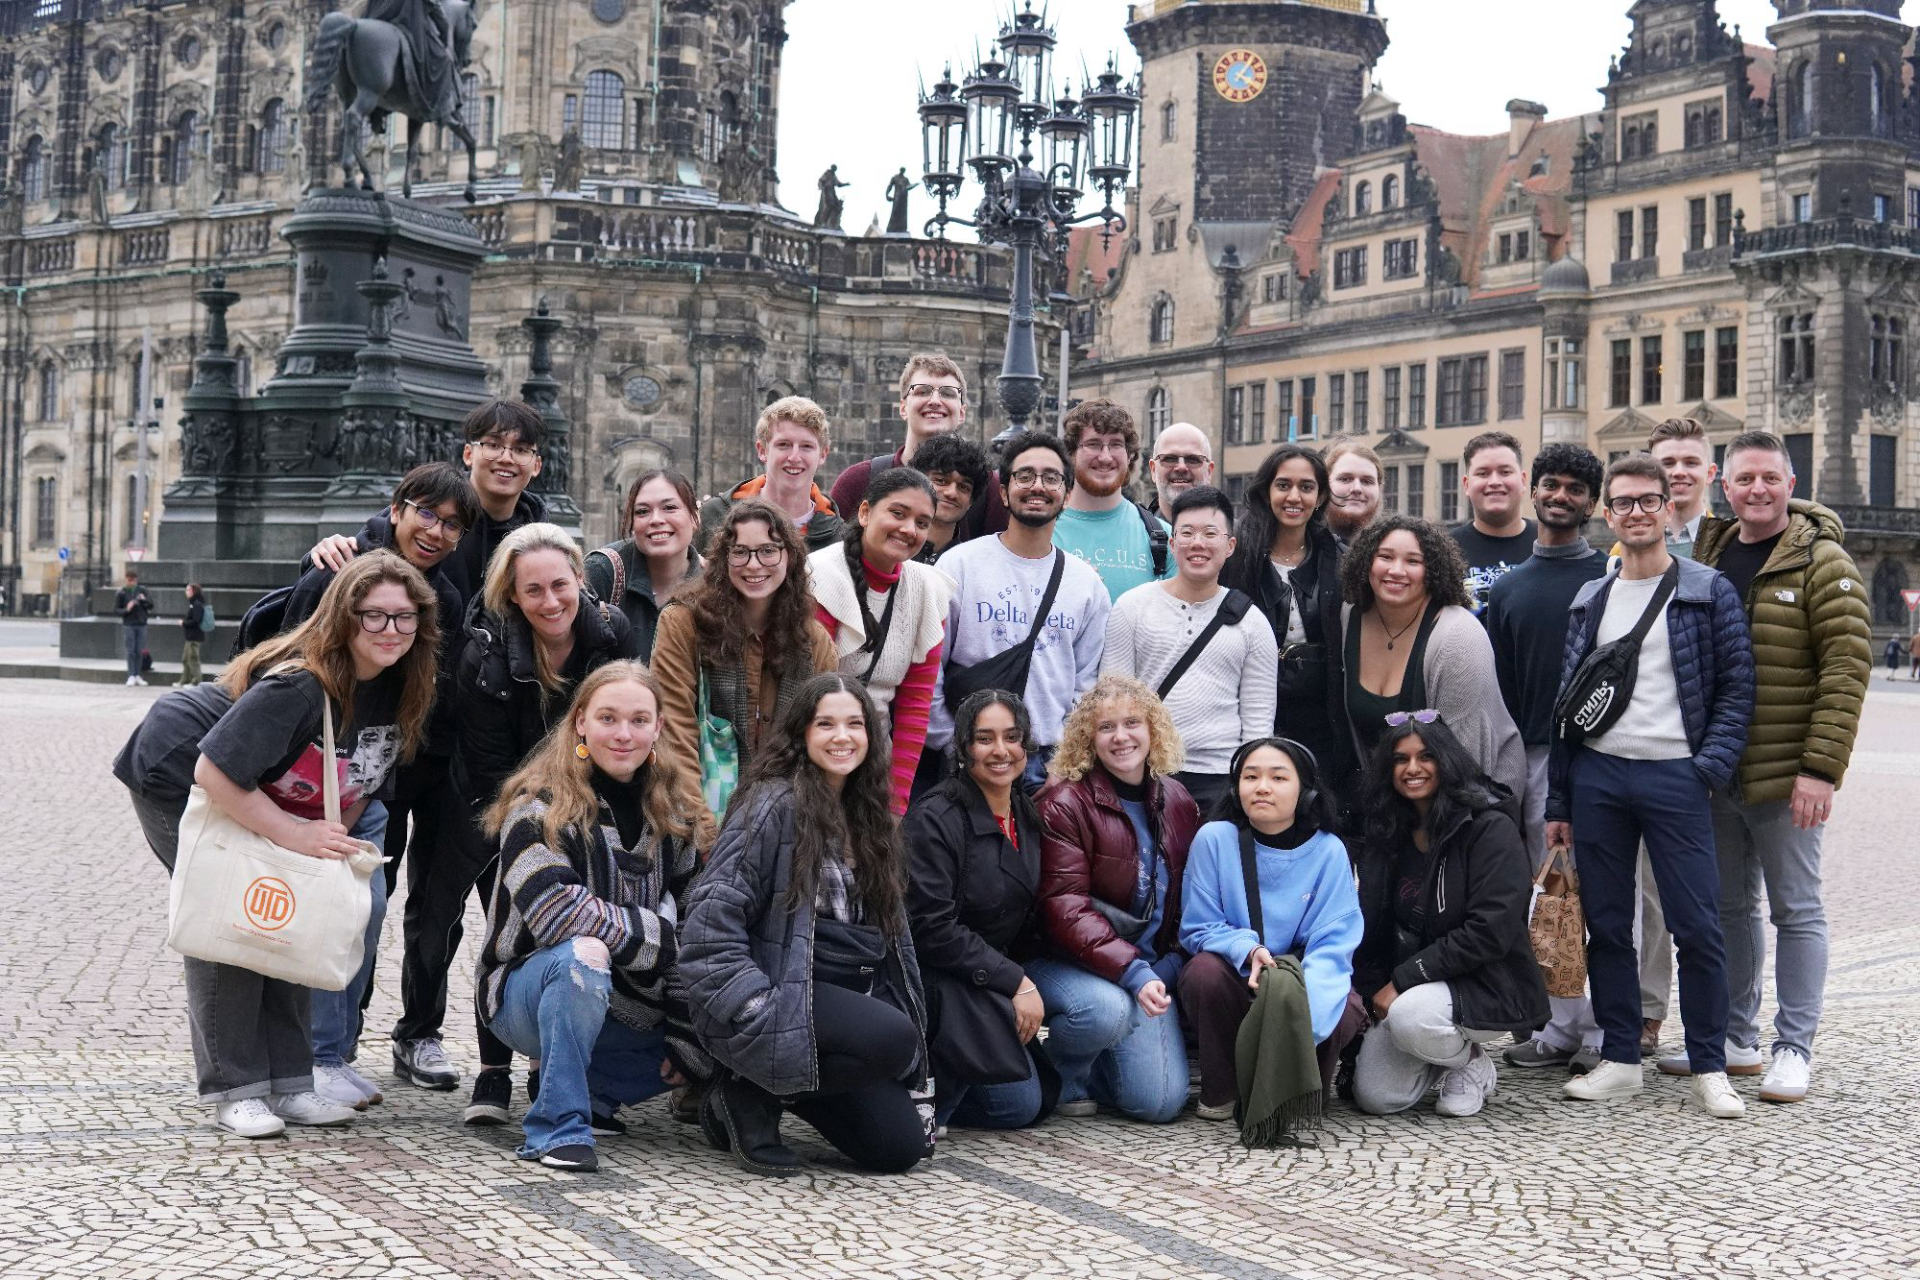 Group picture of the UT Dallas Chamber Singers during their tour of Germany and Poland.